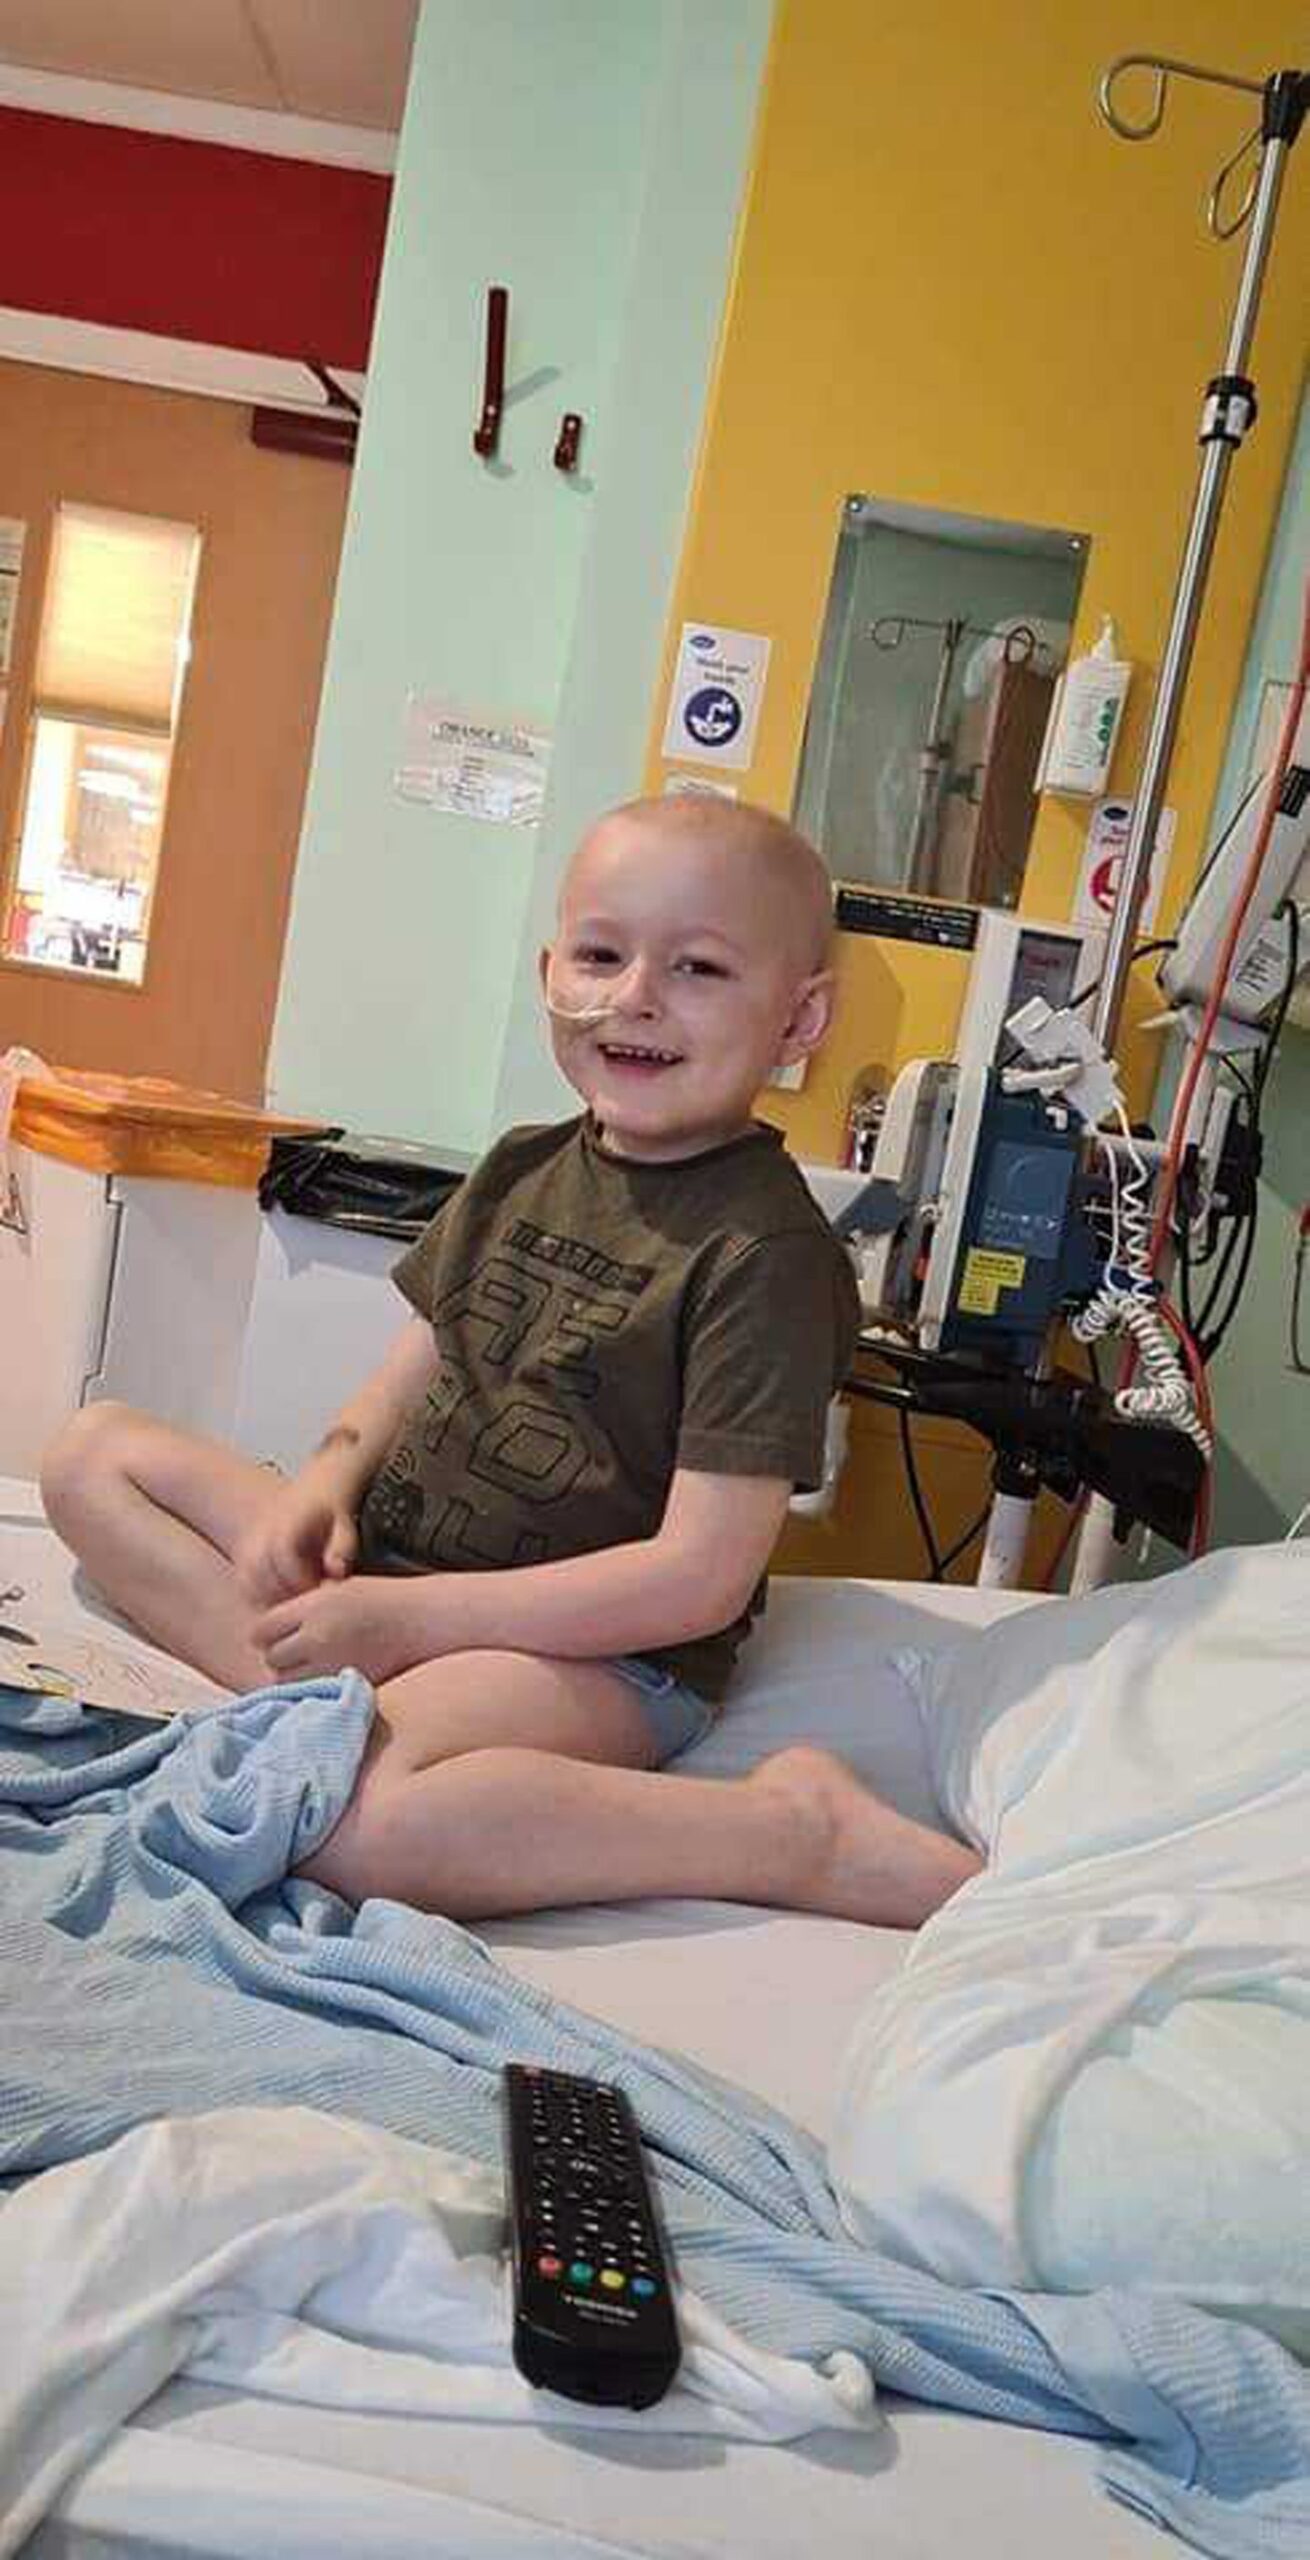 Kelly's son, pictured in a hospital bed, was diagnosed with cancer in April 2020. It prompted Kelly to re-join Slimming World. 